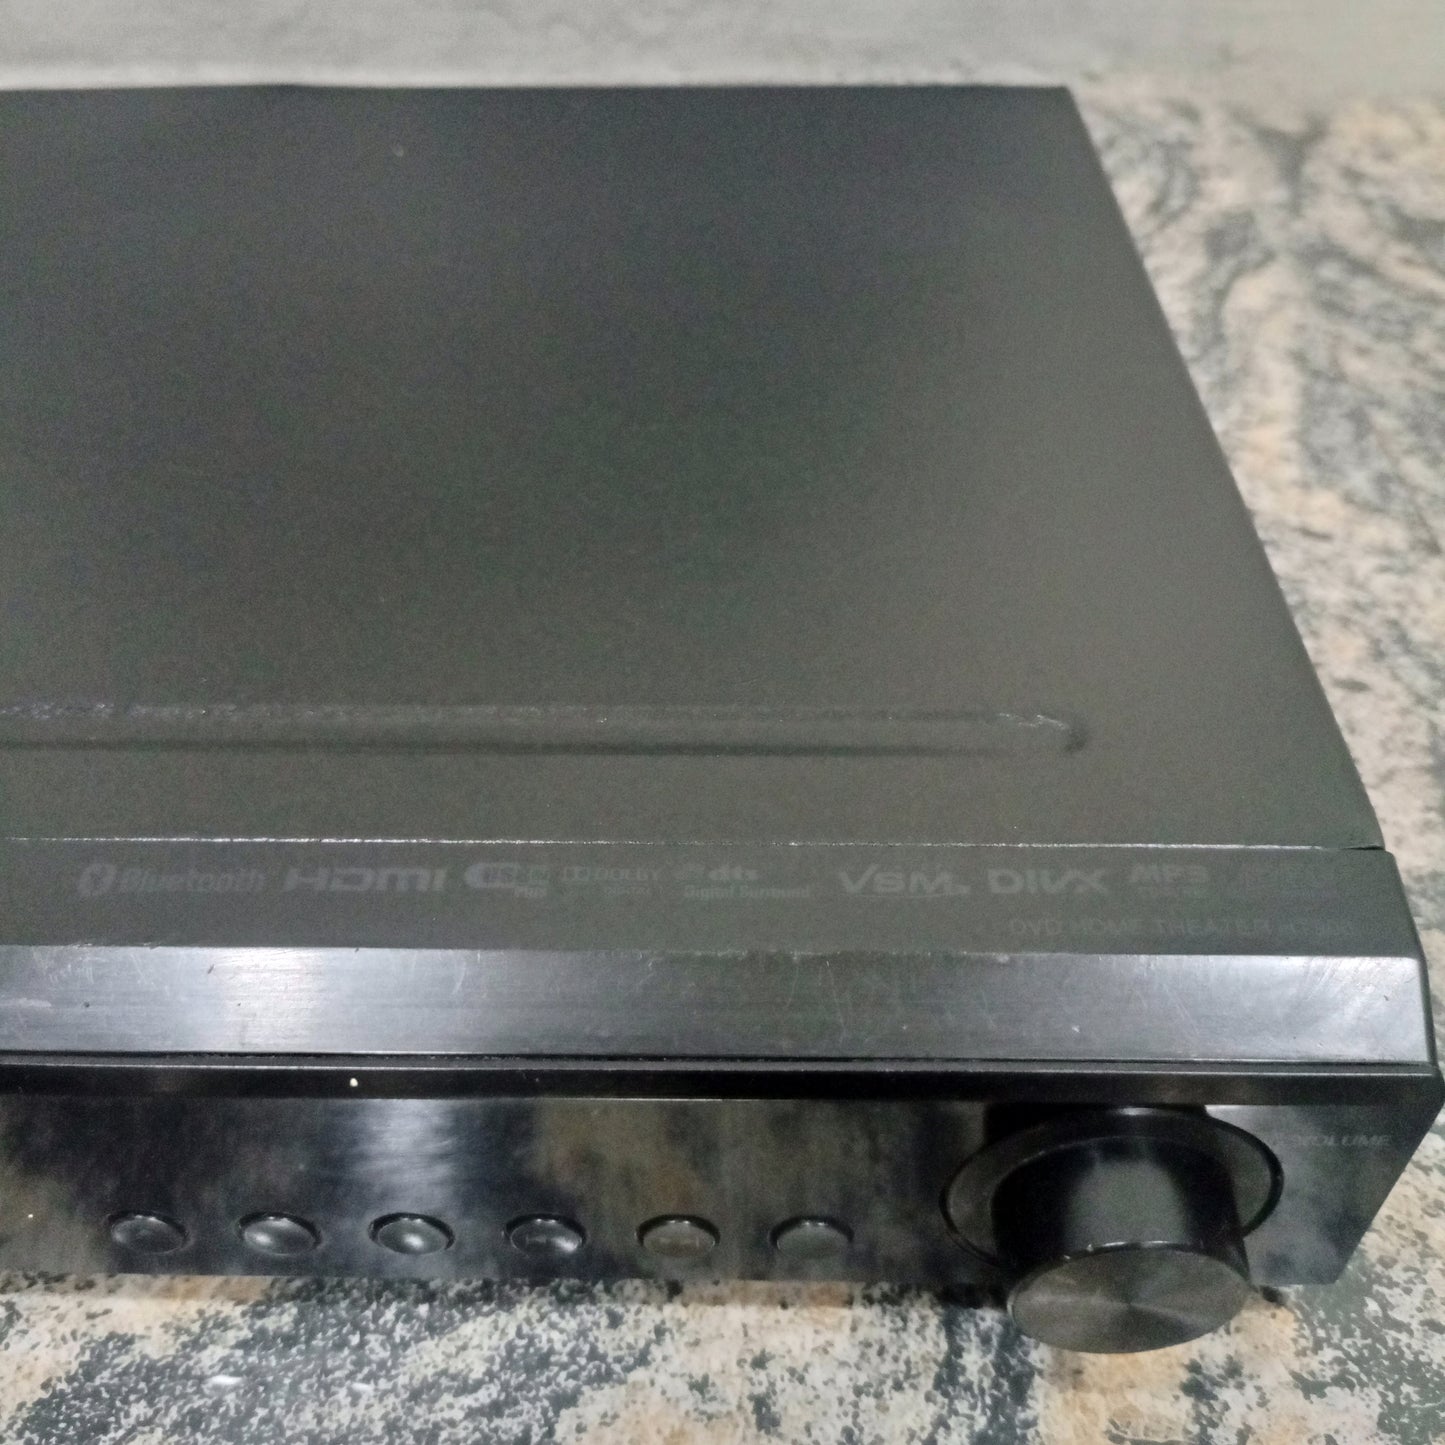 LG HT906TA 5.1Ch 1100Watts Bluetooth DVD Home Theater Machine Head - Foreign Used